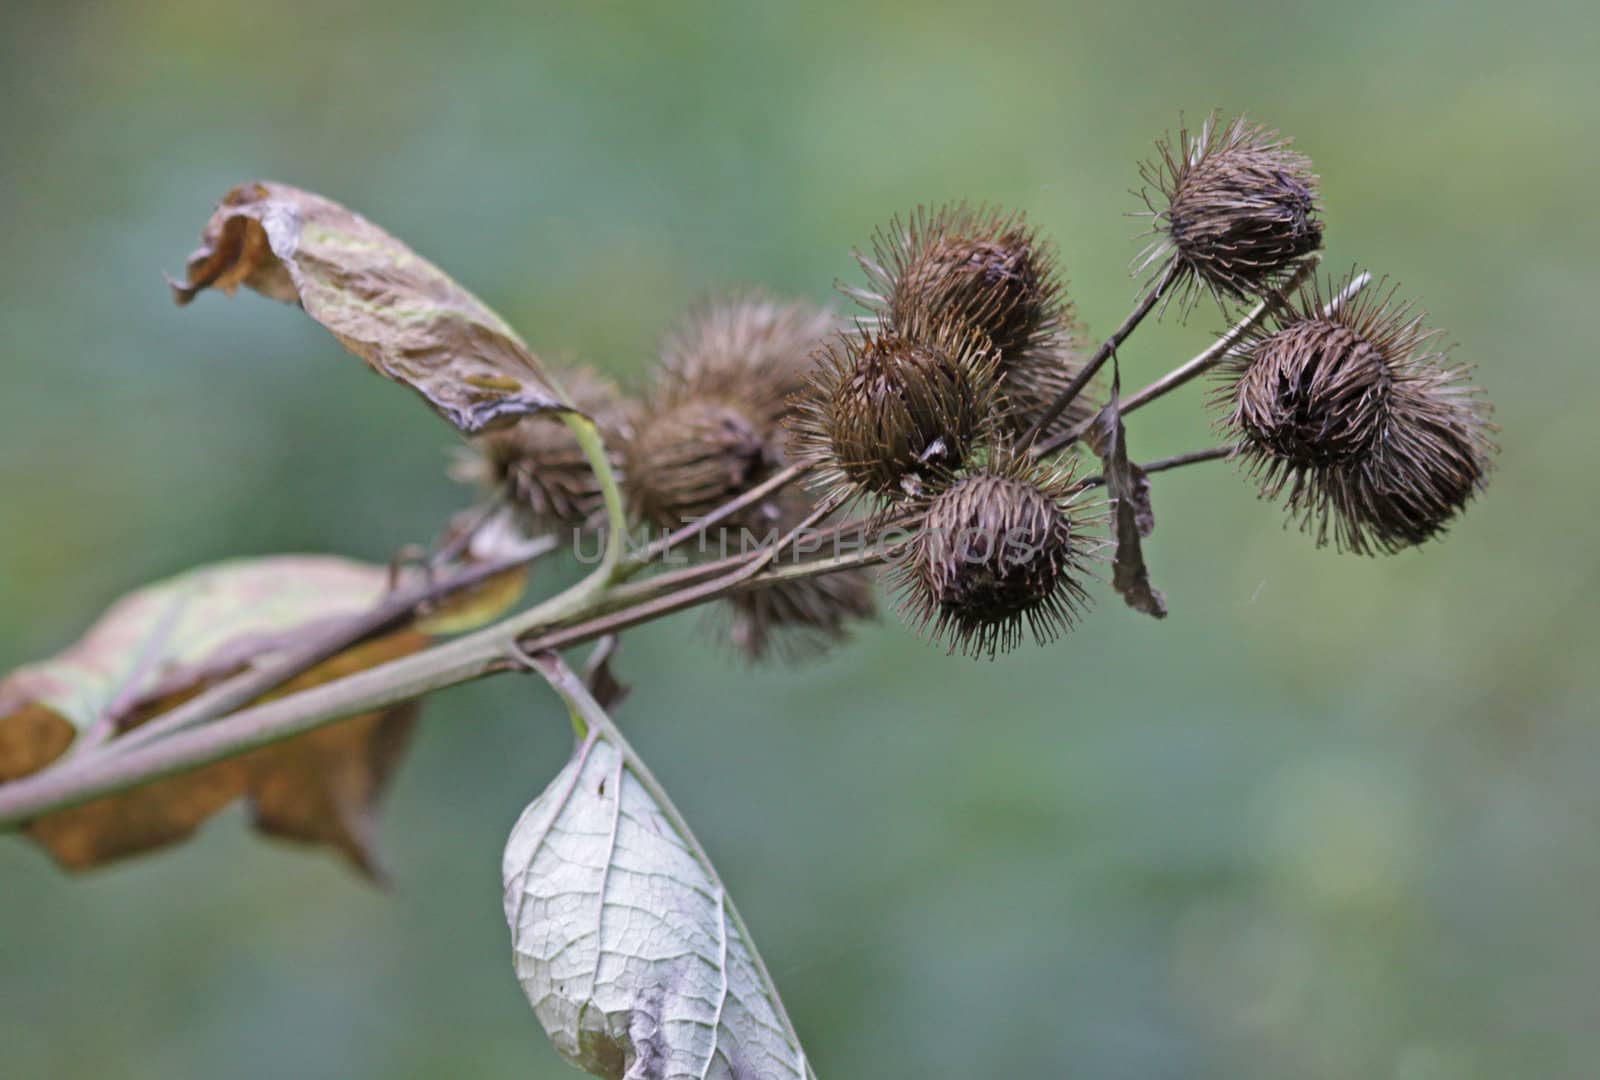 A blooming lesser burdock (Arctium minus) plant with burs on full display.  Shot in Southern Ontario, Canada.
